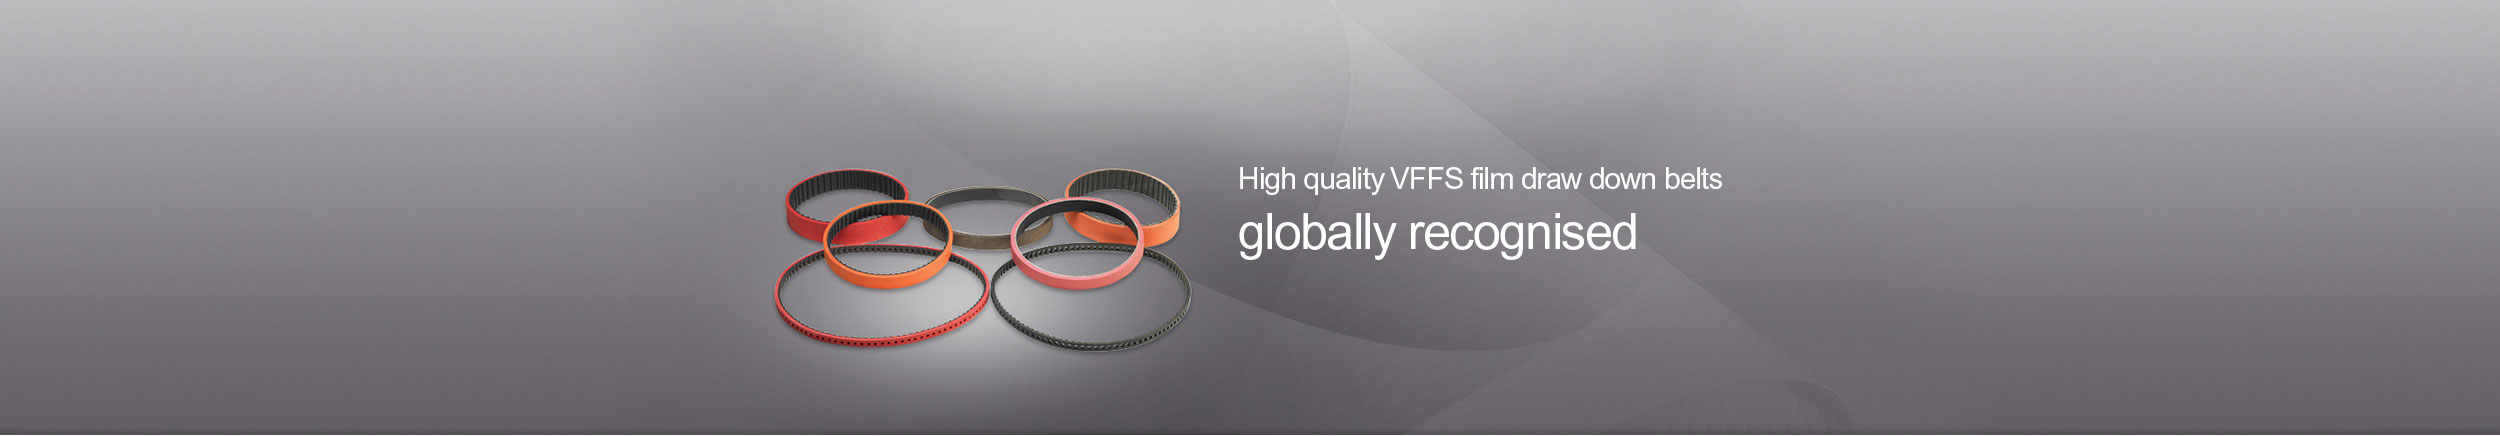 VFFS Belts - Kenray Forming, Forming Sets, VFFS, Packaging